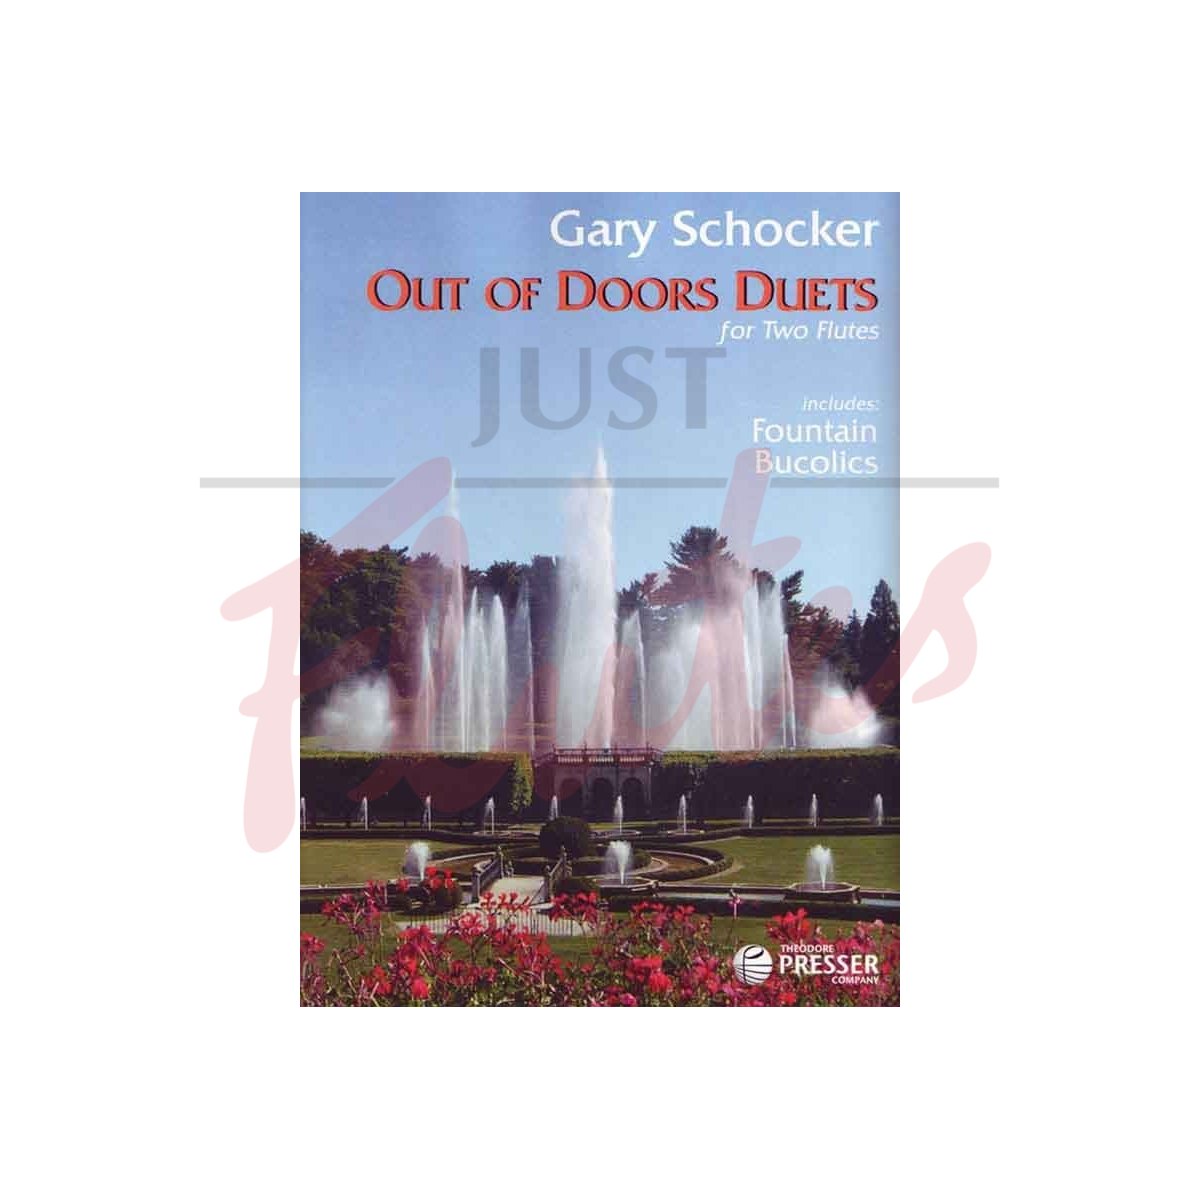 Out of Doors Duets for Two Flutes